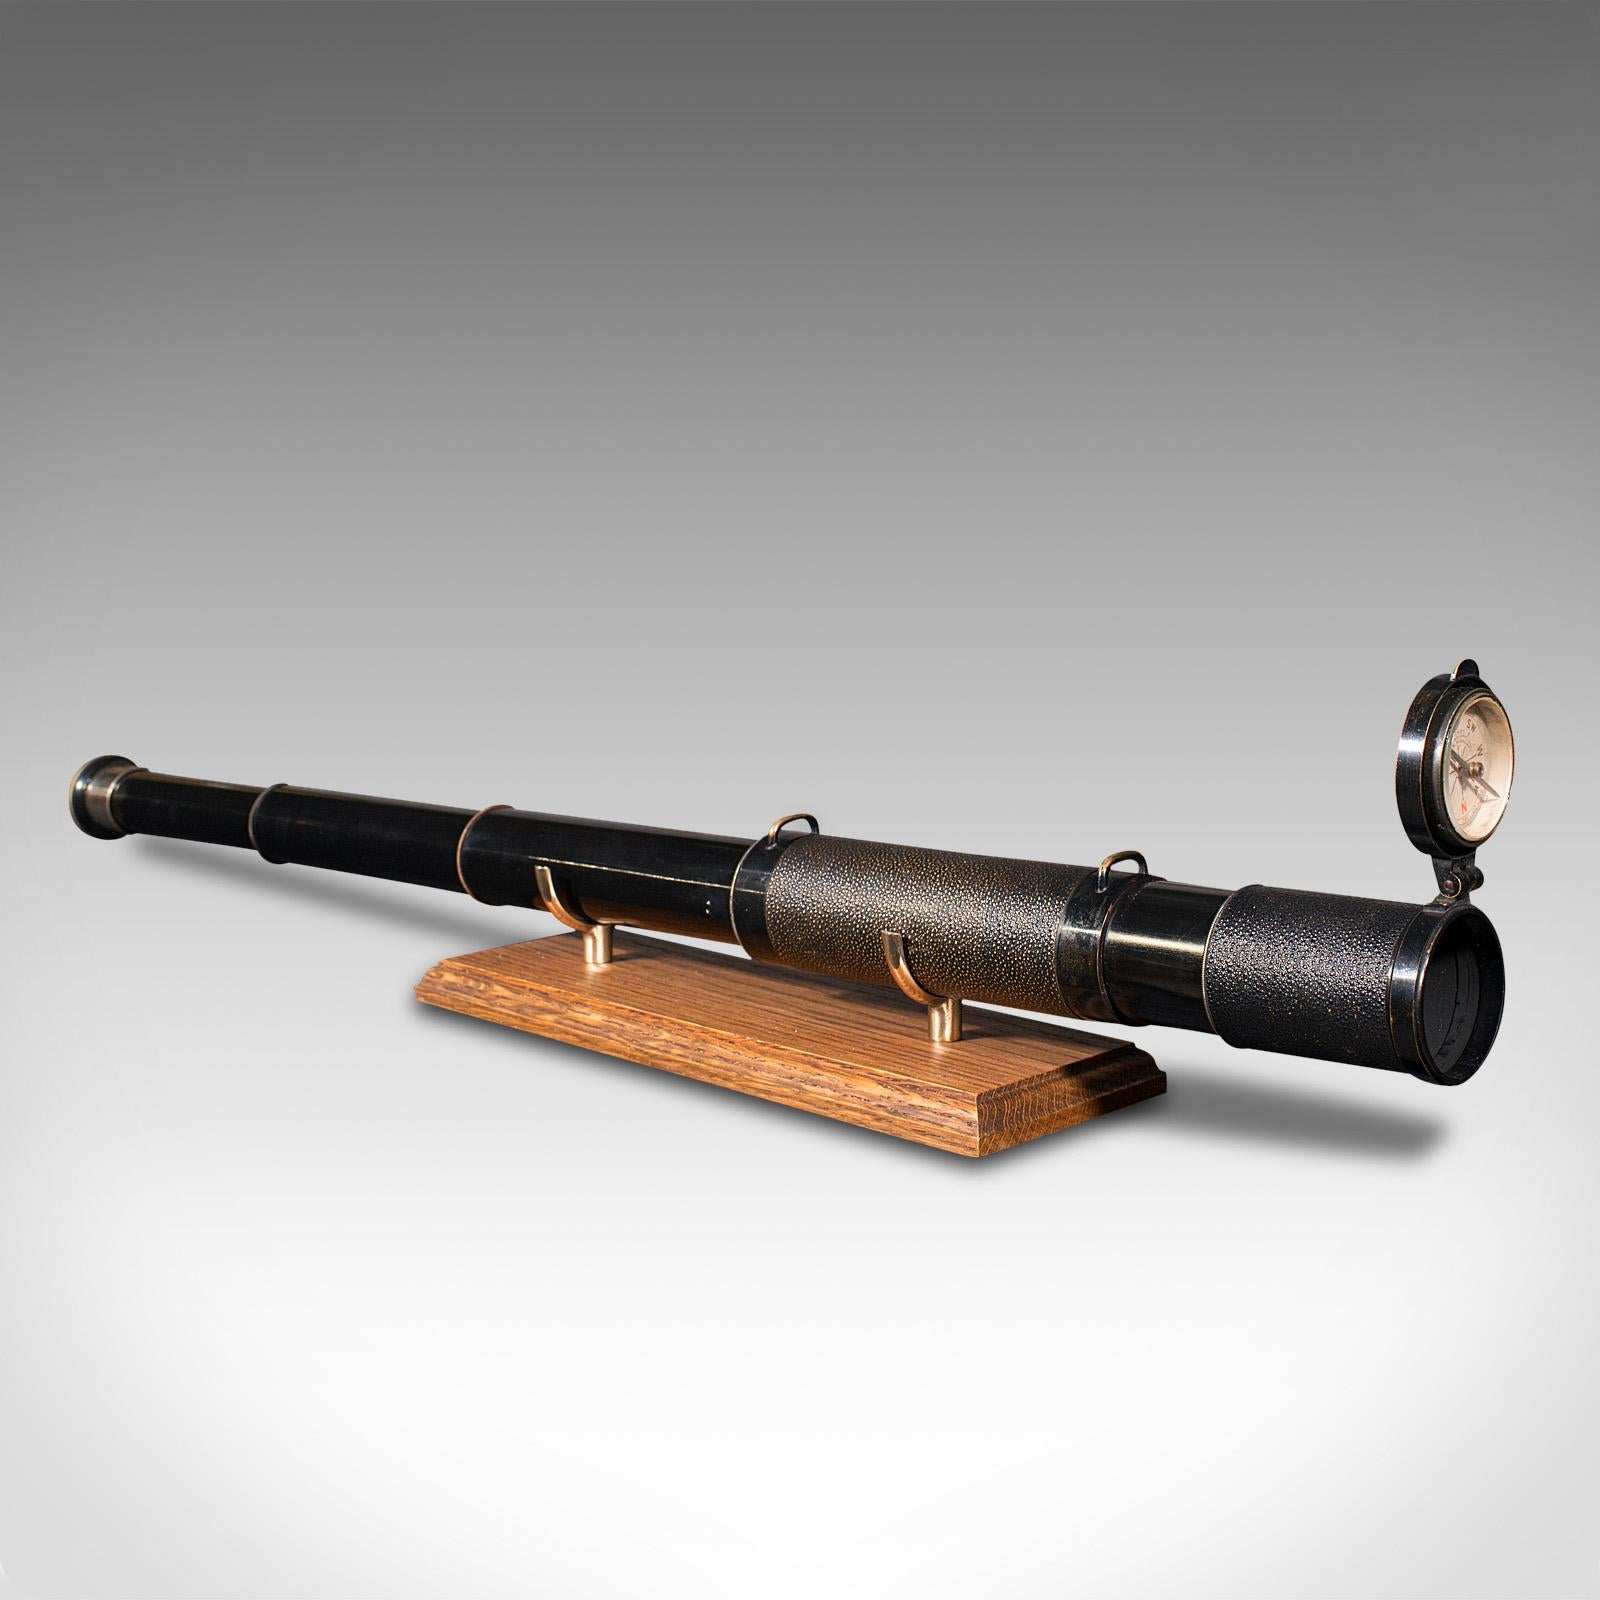 This is an antique 3 draw telescope. An English, enamelled brass 'The Sign Post' terrestrial refractor with compass by Lawrence & Mayo of London, dating to the late Victorian period, circa 1900.

Perfect for bird watching, landscape appreciation,